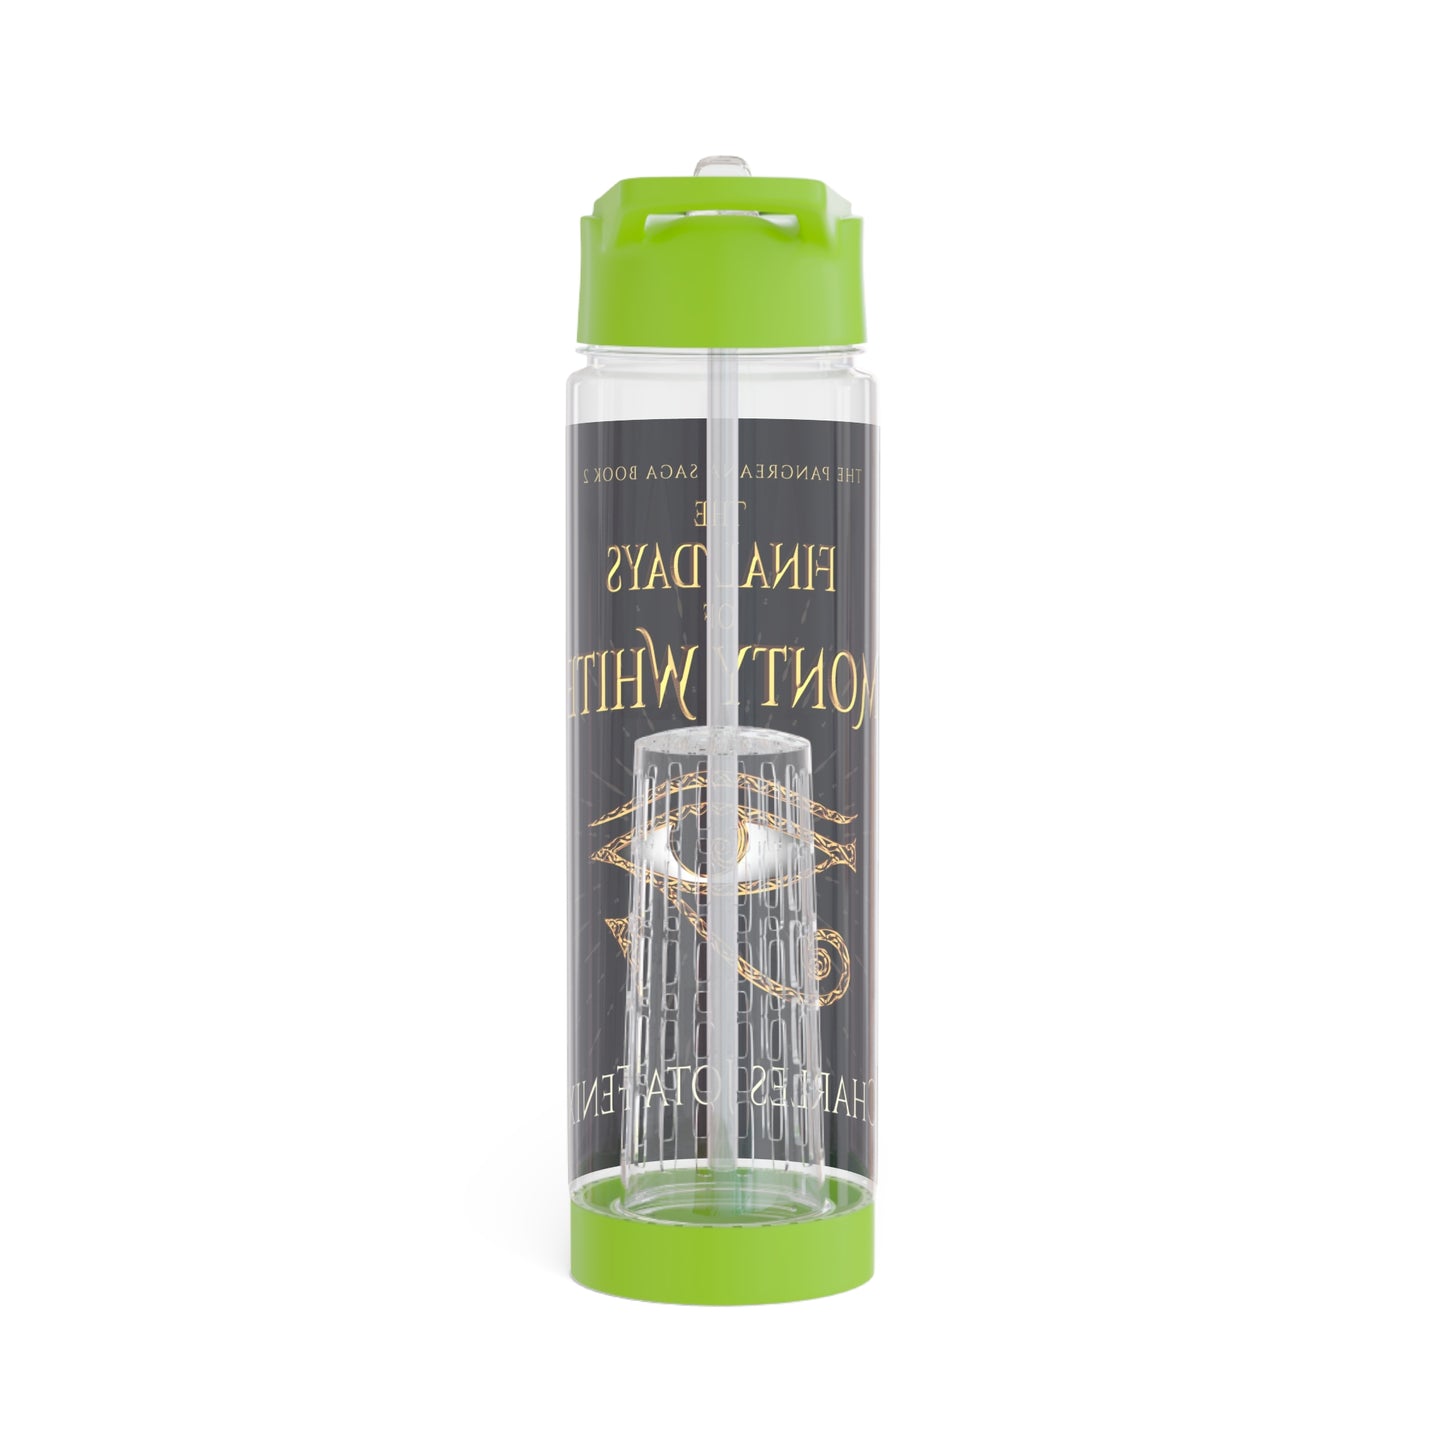 The Final Days of Monty White - Infuser Water Bottle